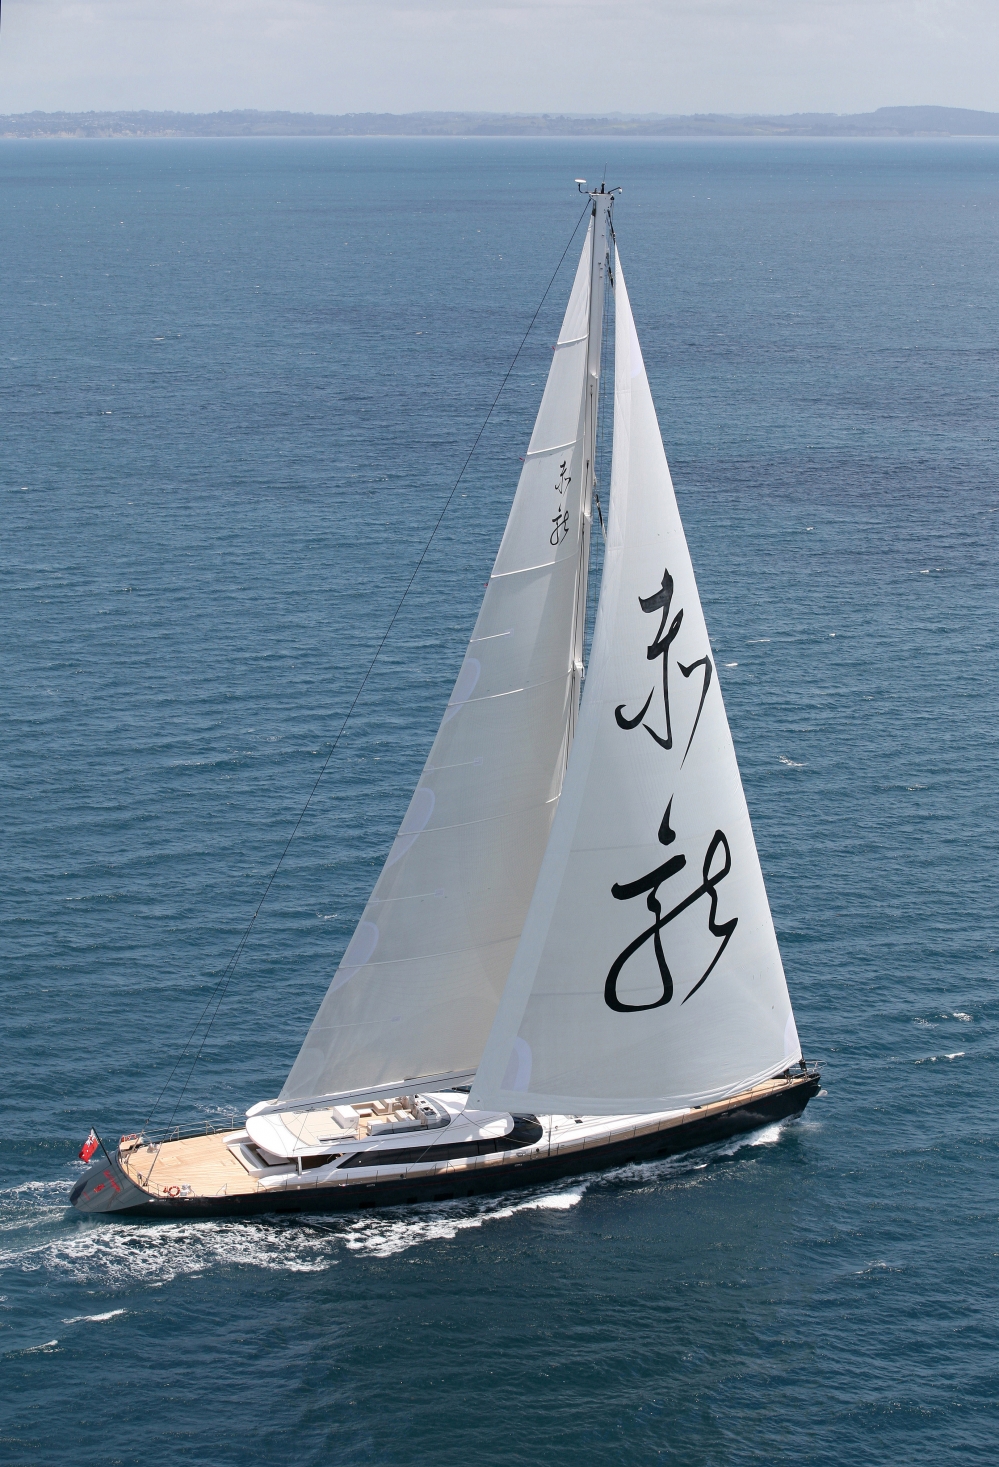 Yacht%20RED%20DRAGON%20-%20Image%20Courtesy%20of%20Millenium%20Cup%20New%20Zealand.jpg